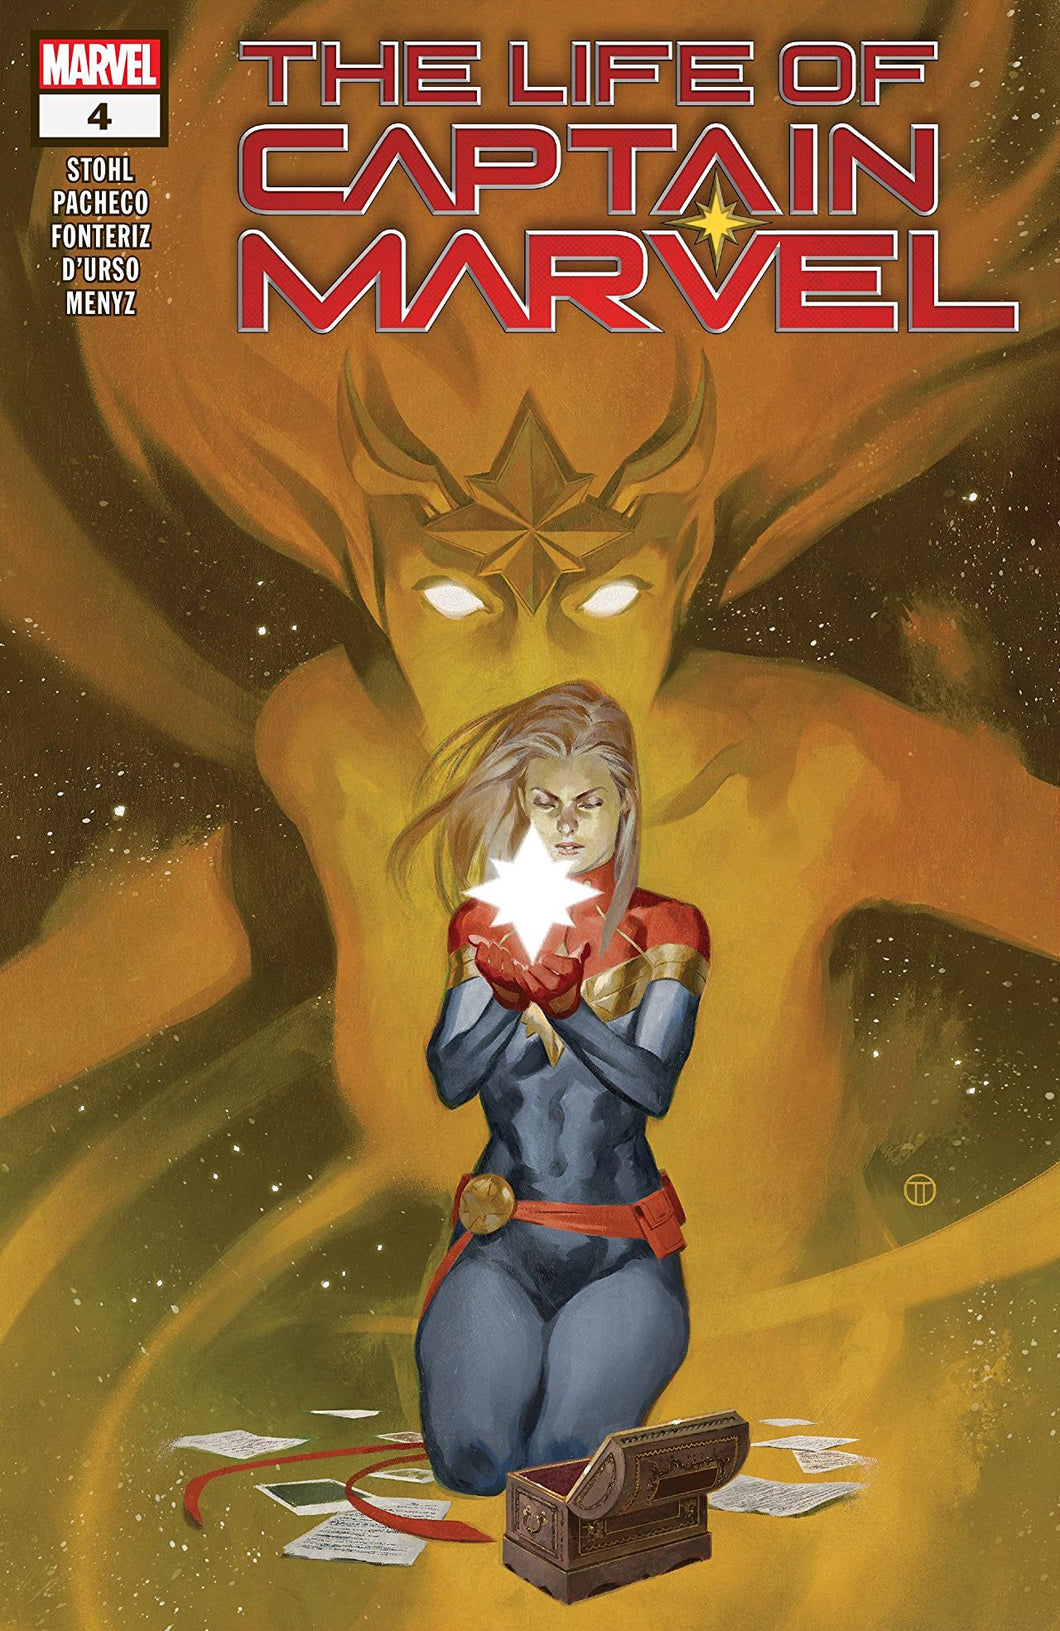 LIFE OF CAPTAIN MARVEL #4 (OF 5) (10/17/2018)